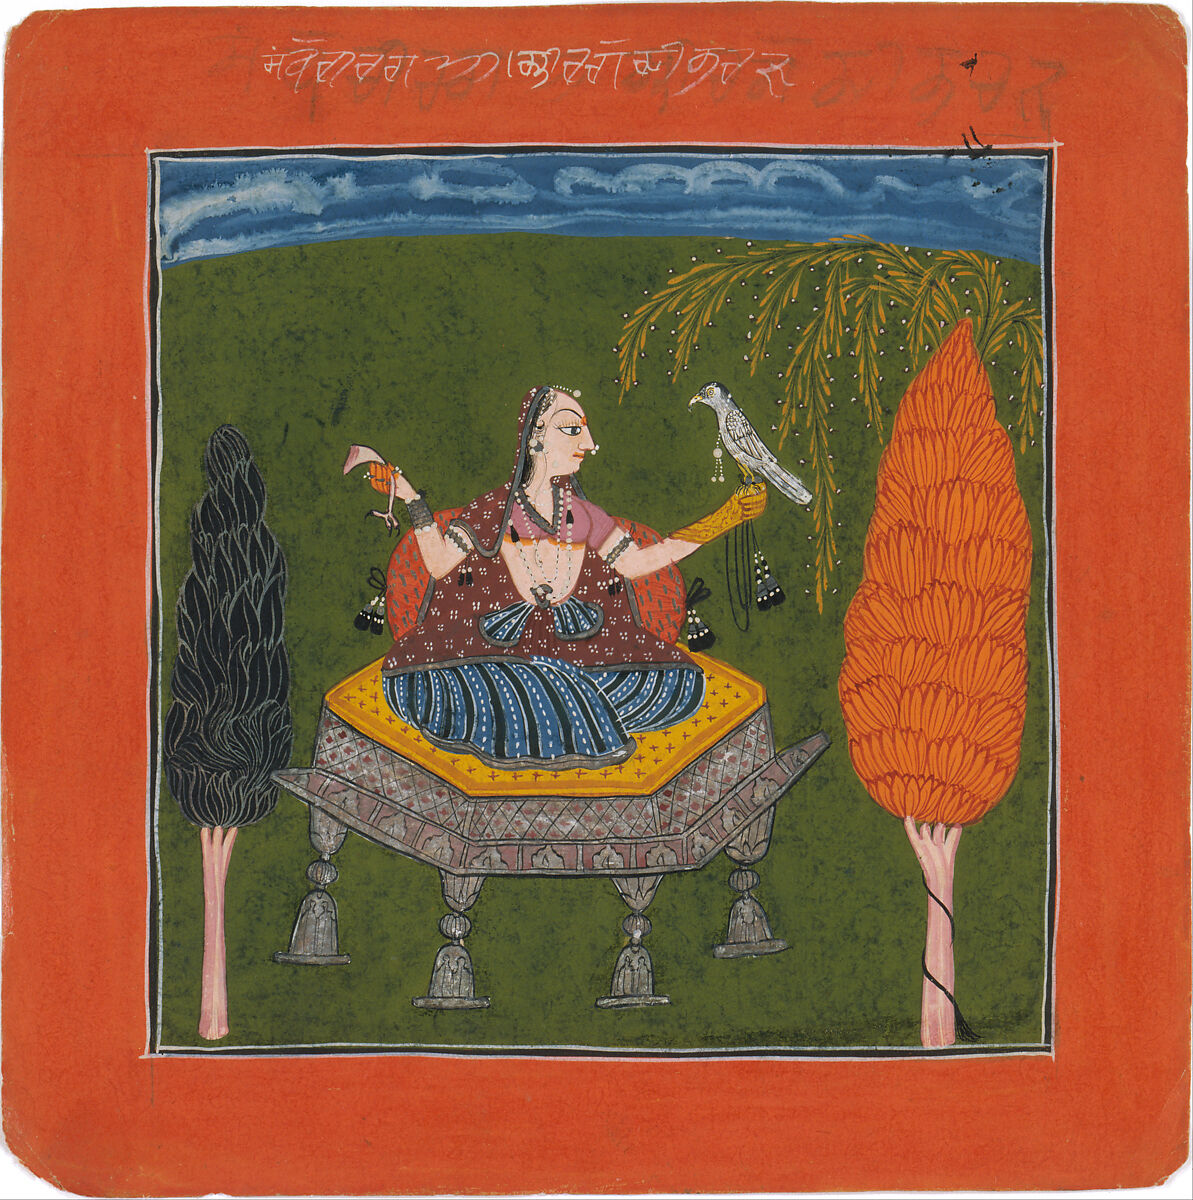 Sanveri Ragini, Page from a Ragamala Series (Garland of Musical Modes), Ink, opaque watercolor, and silver on paper, India (Himachal Pradesh, possibly Basohli or Nurpur) 